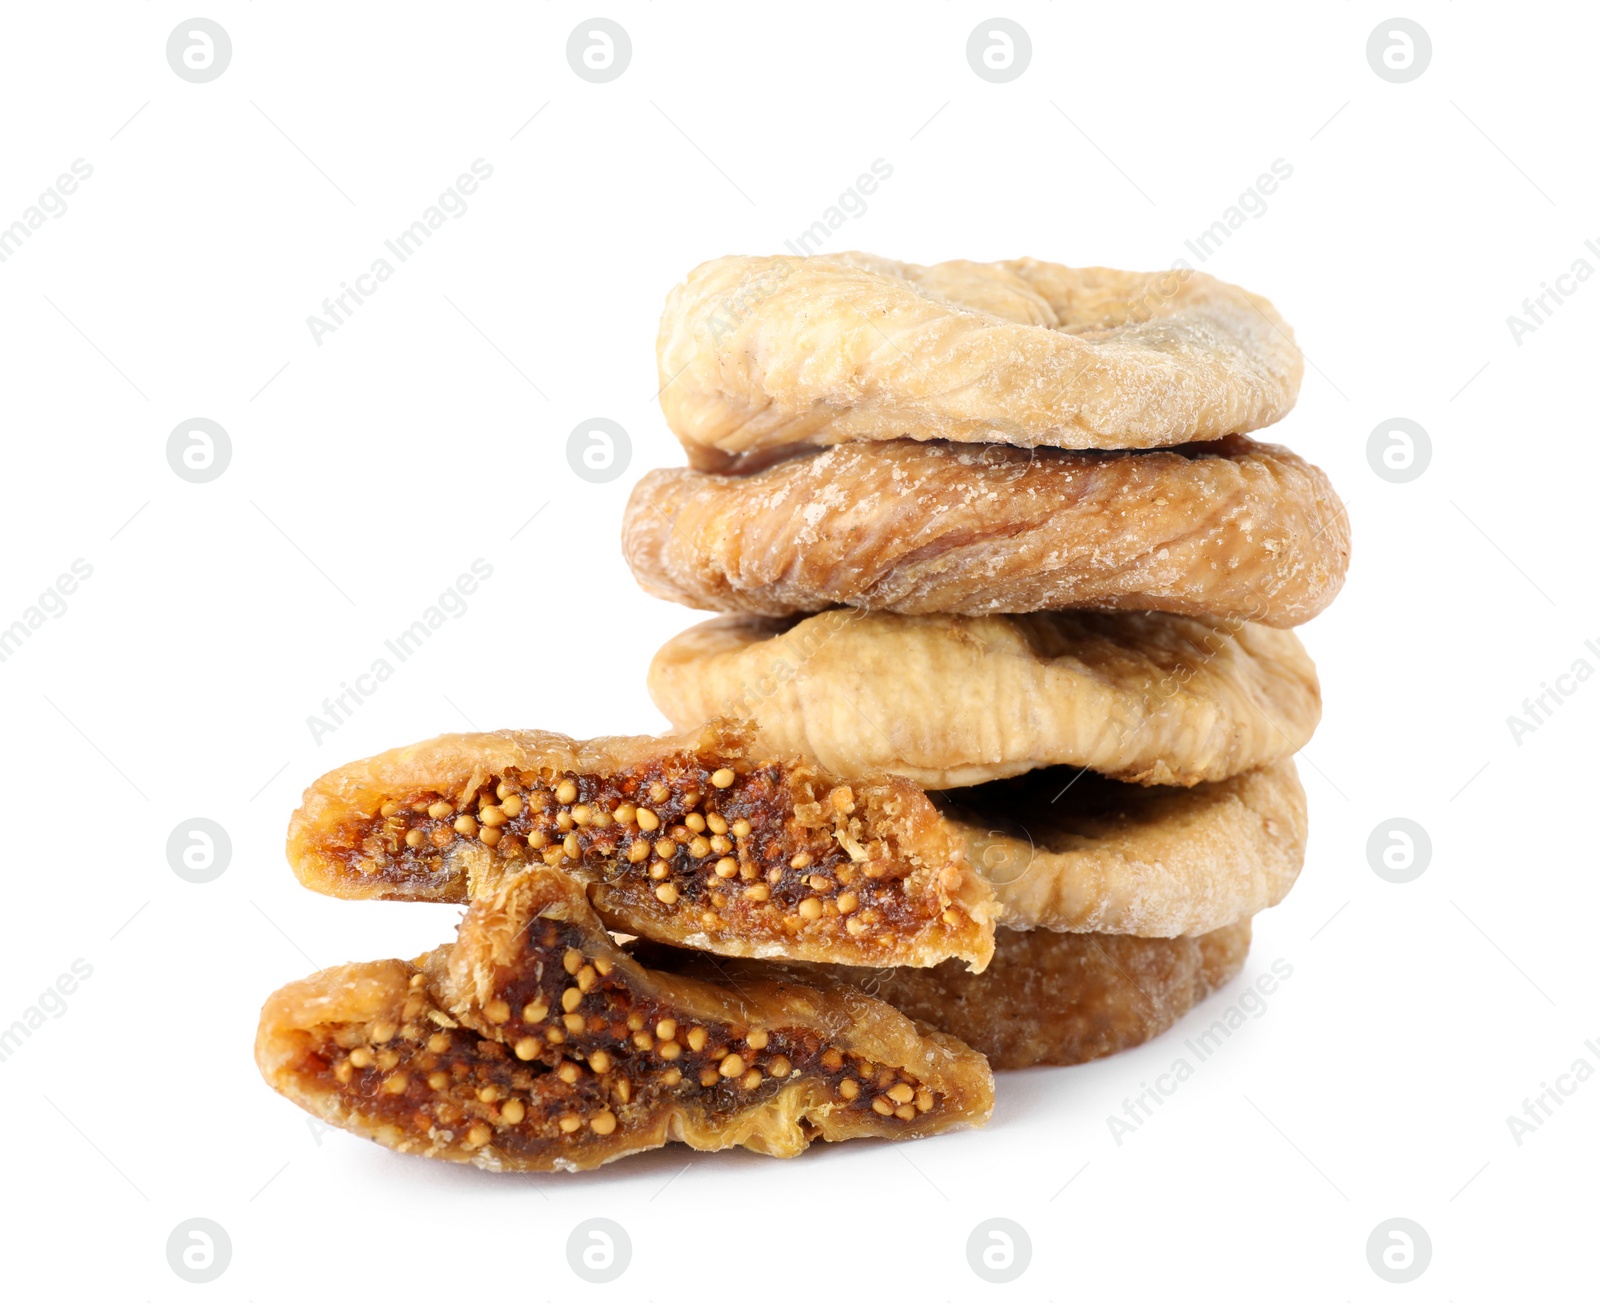 Photo of Pile of tasty dried figs on white background